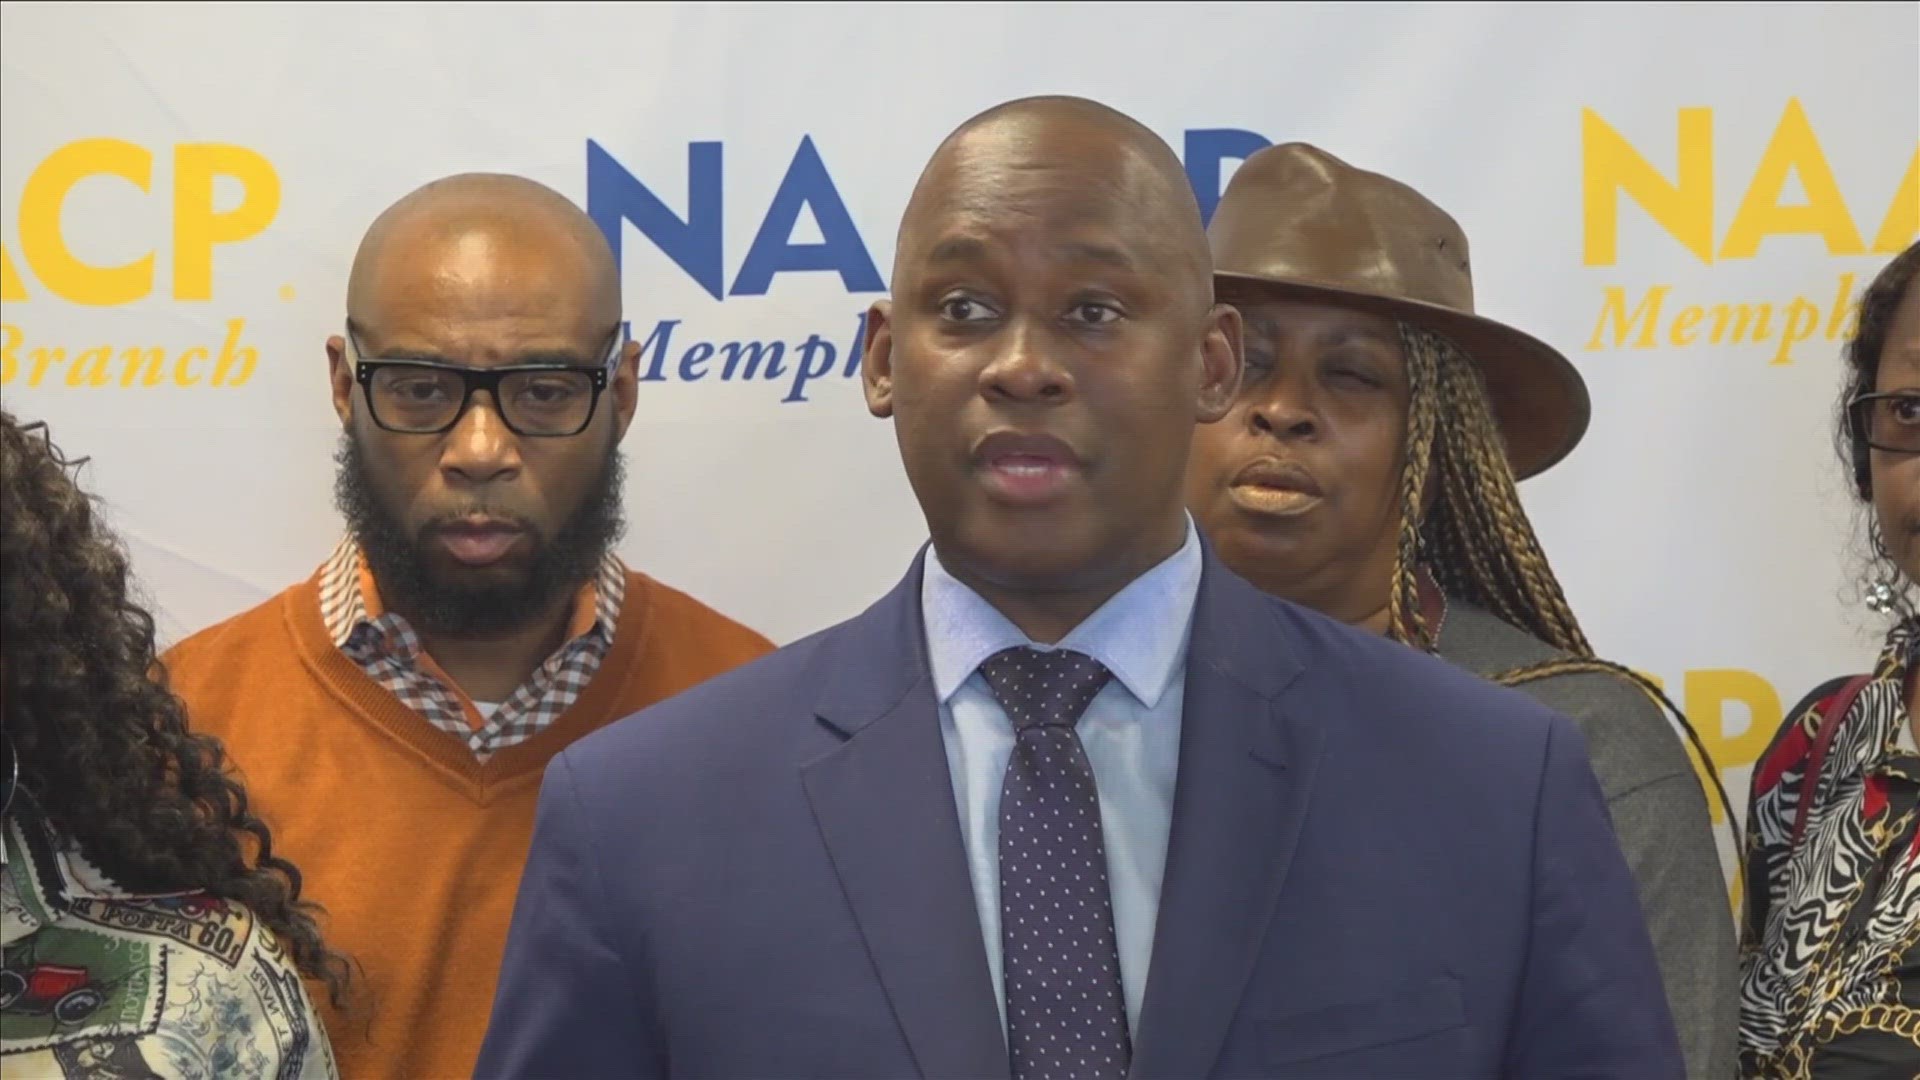 On Monday, the Memphis NAACP chapter requested the courts keep former inmate Courtney Anderson out of jail.